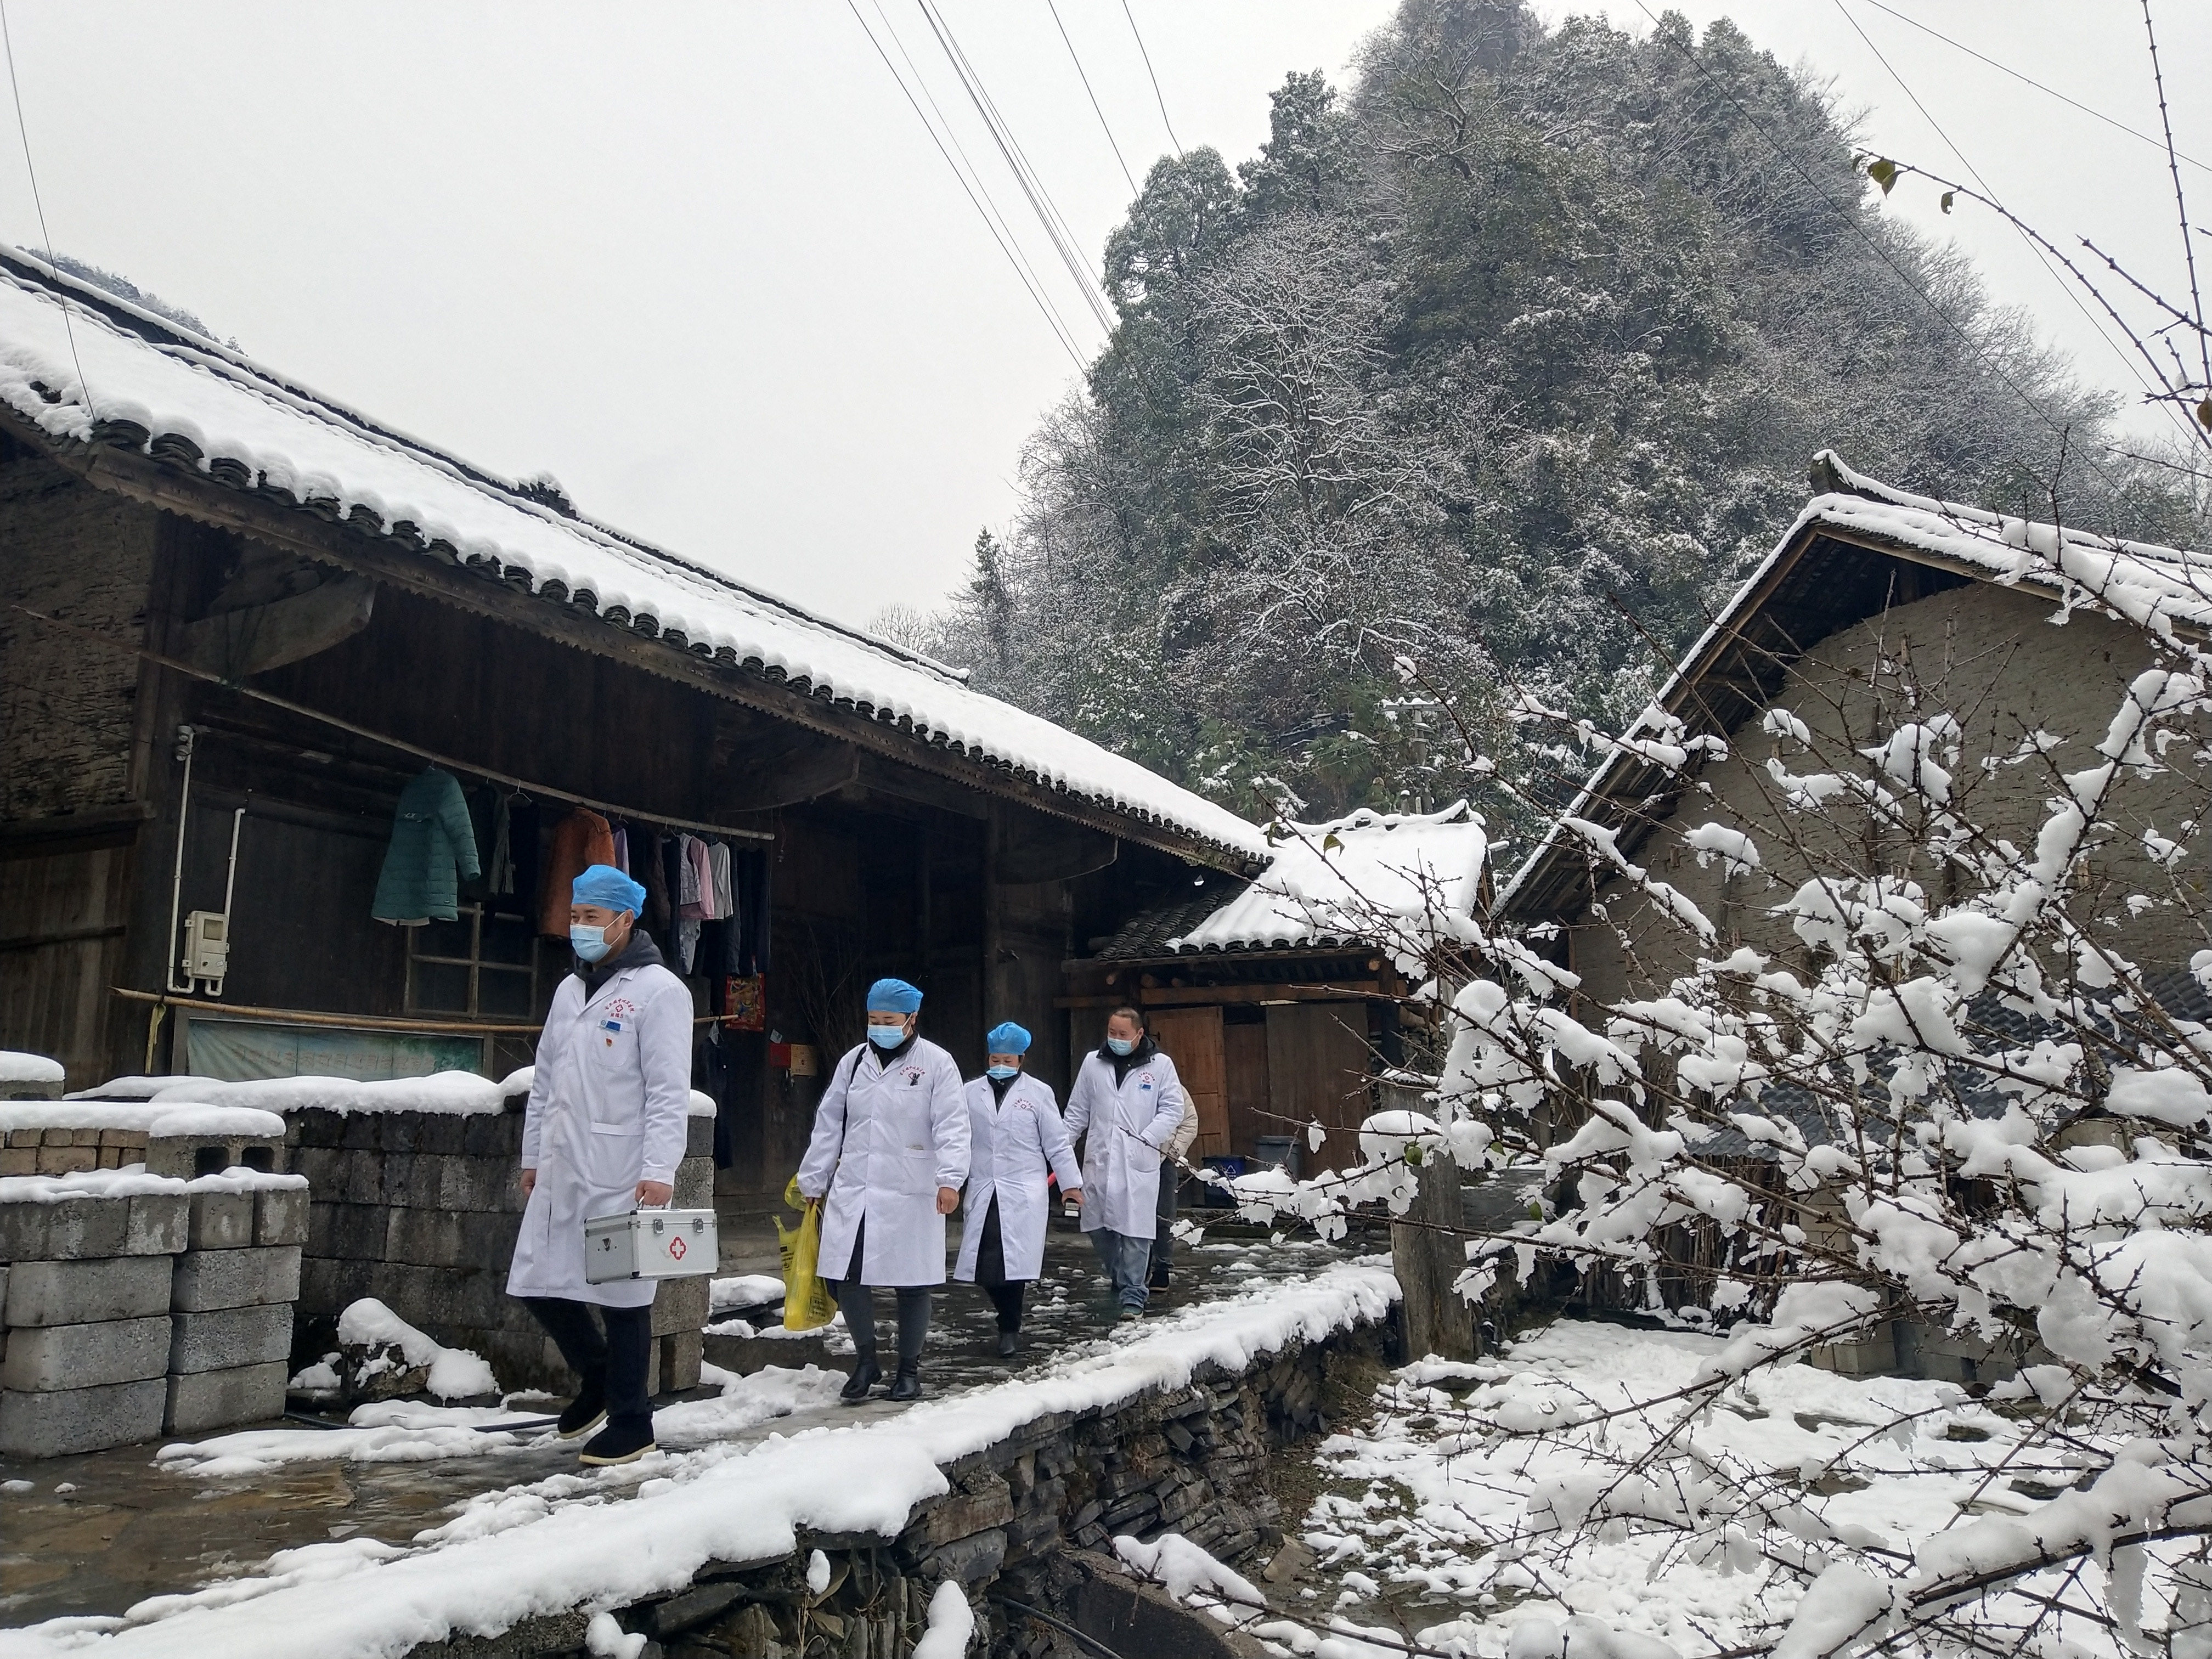 Rural doctors visit households to provide medical support in central China’s Hunan Province. Photo: Xinhua